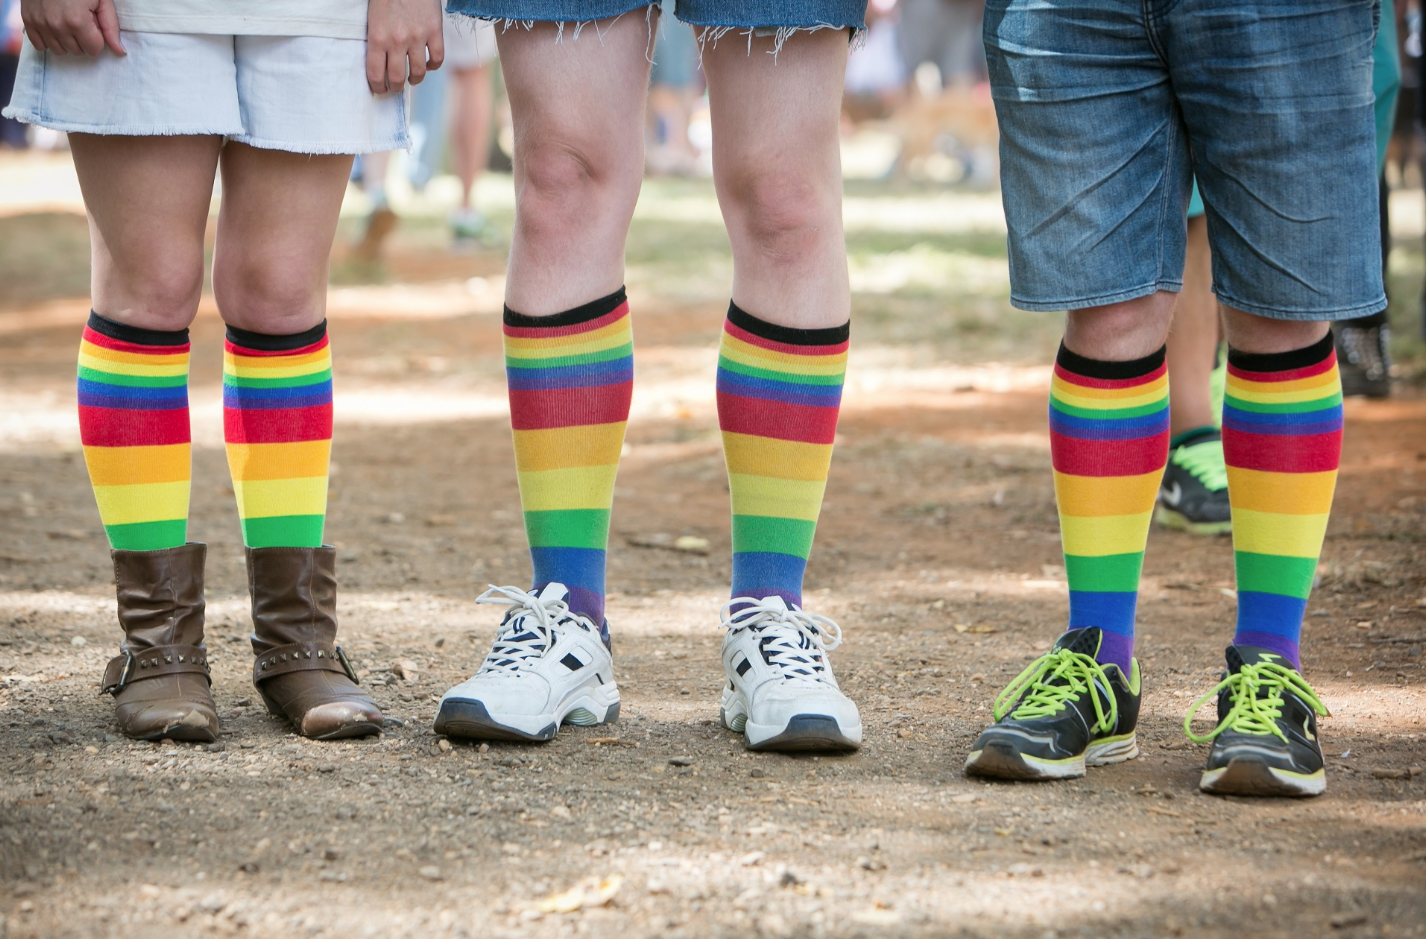 ChillOut Festival to tackle homophobia in regional Victoria